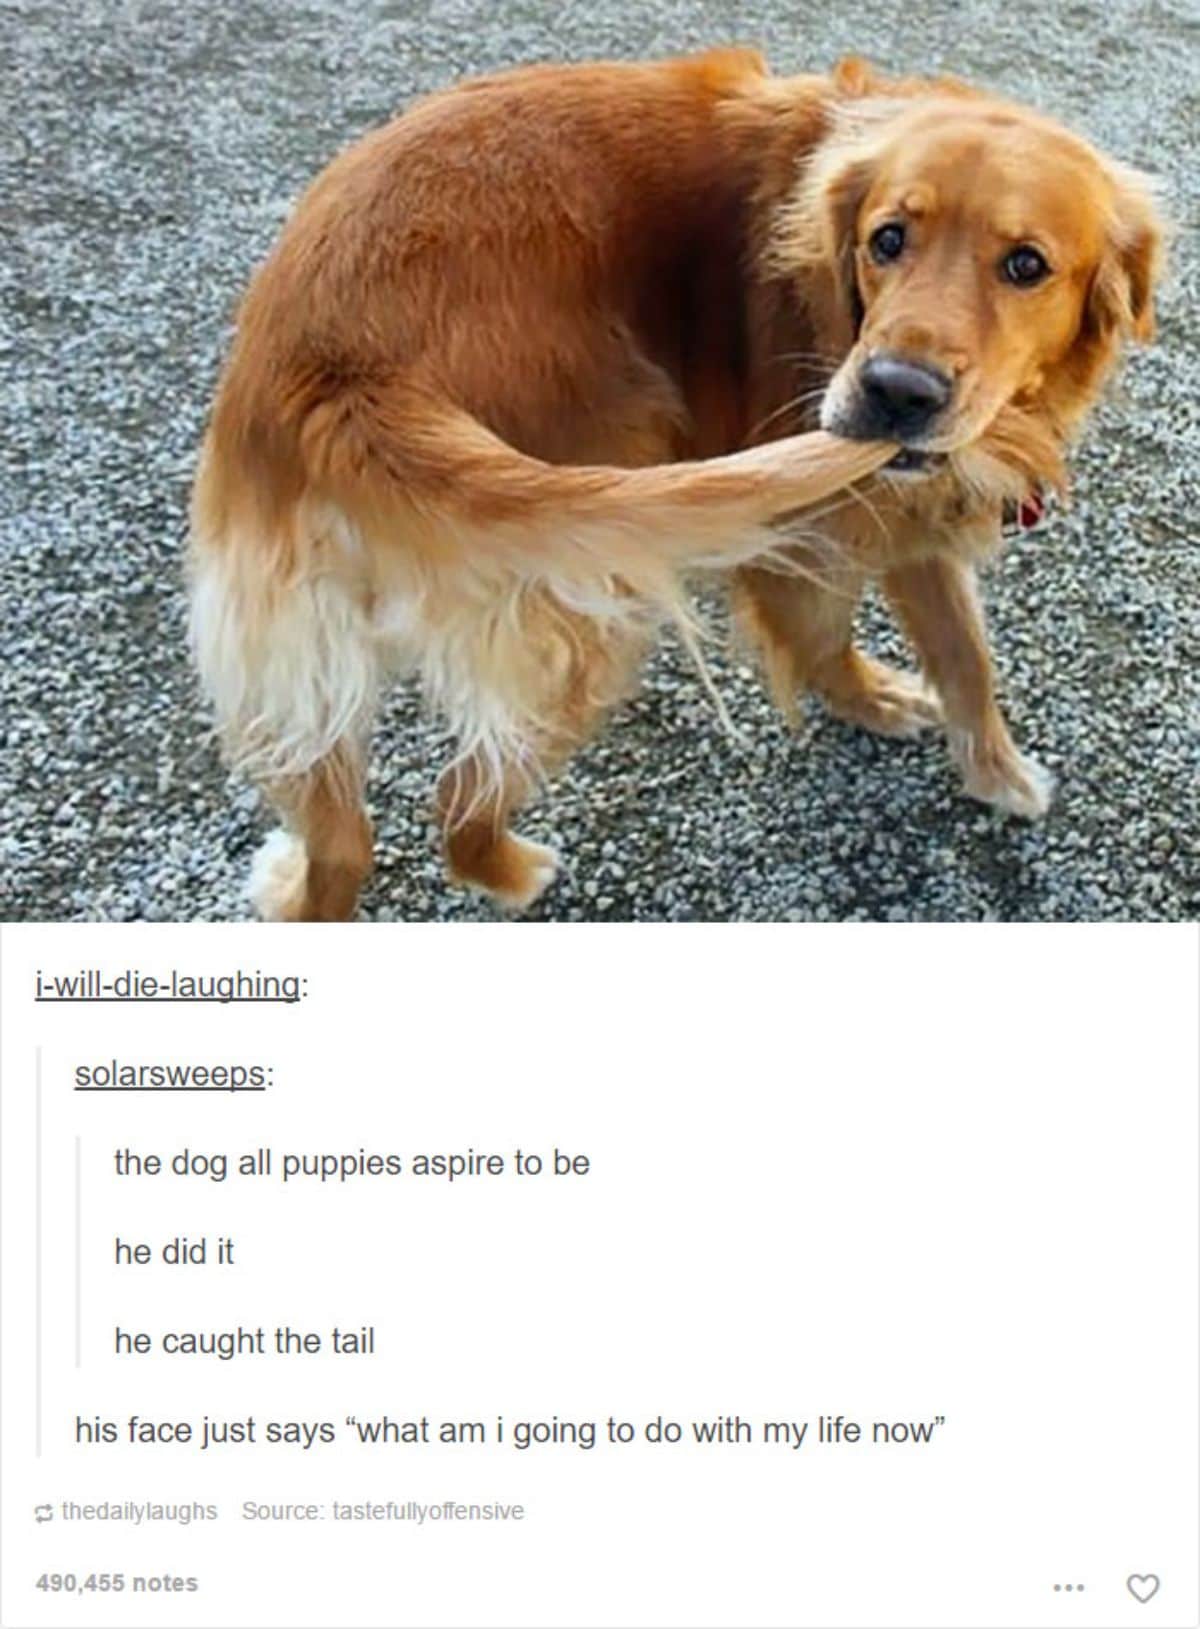 tumblr post of golden retriever holding the tail with captions saying the dog all puppies want to be and his face says what do I do with my life now